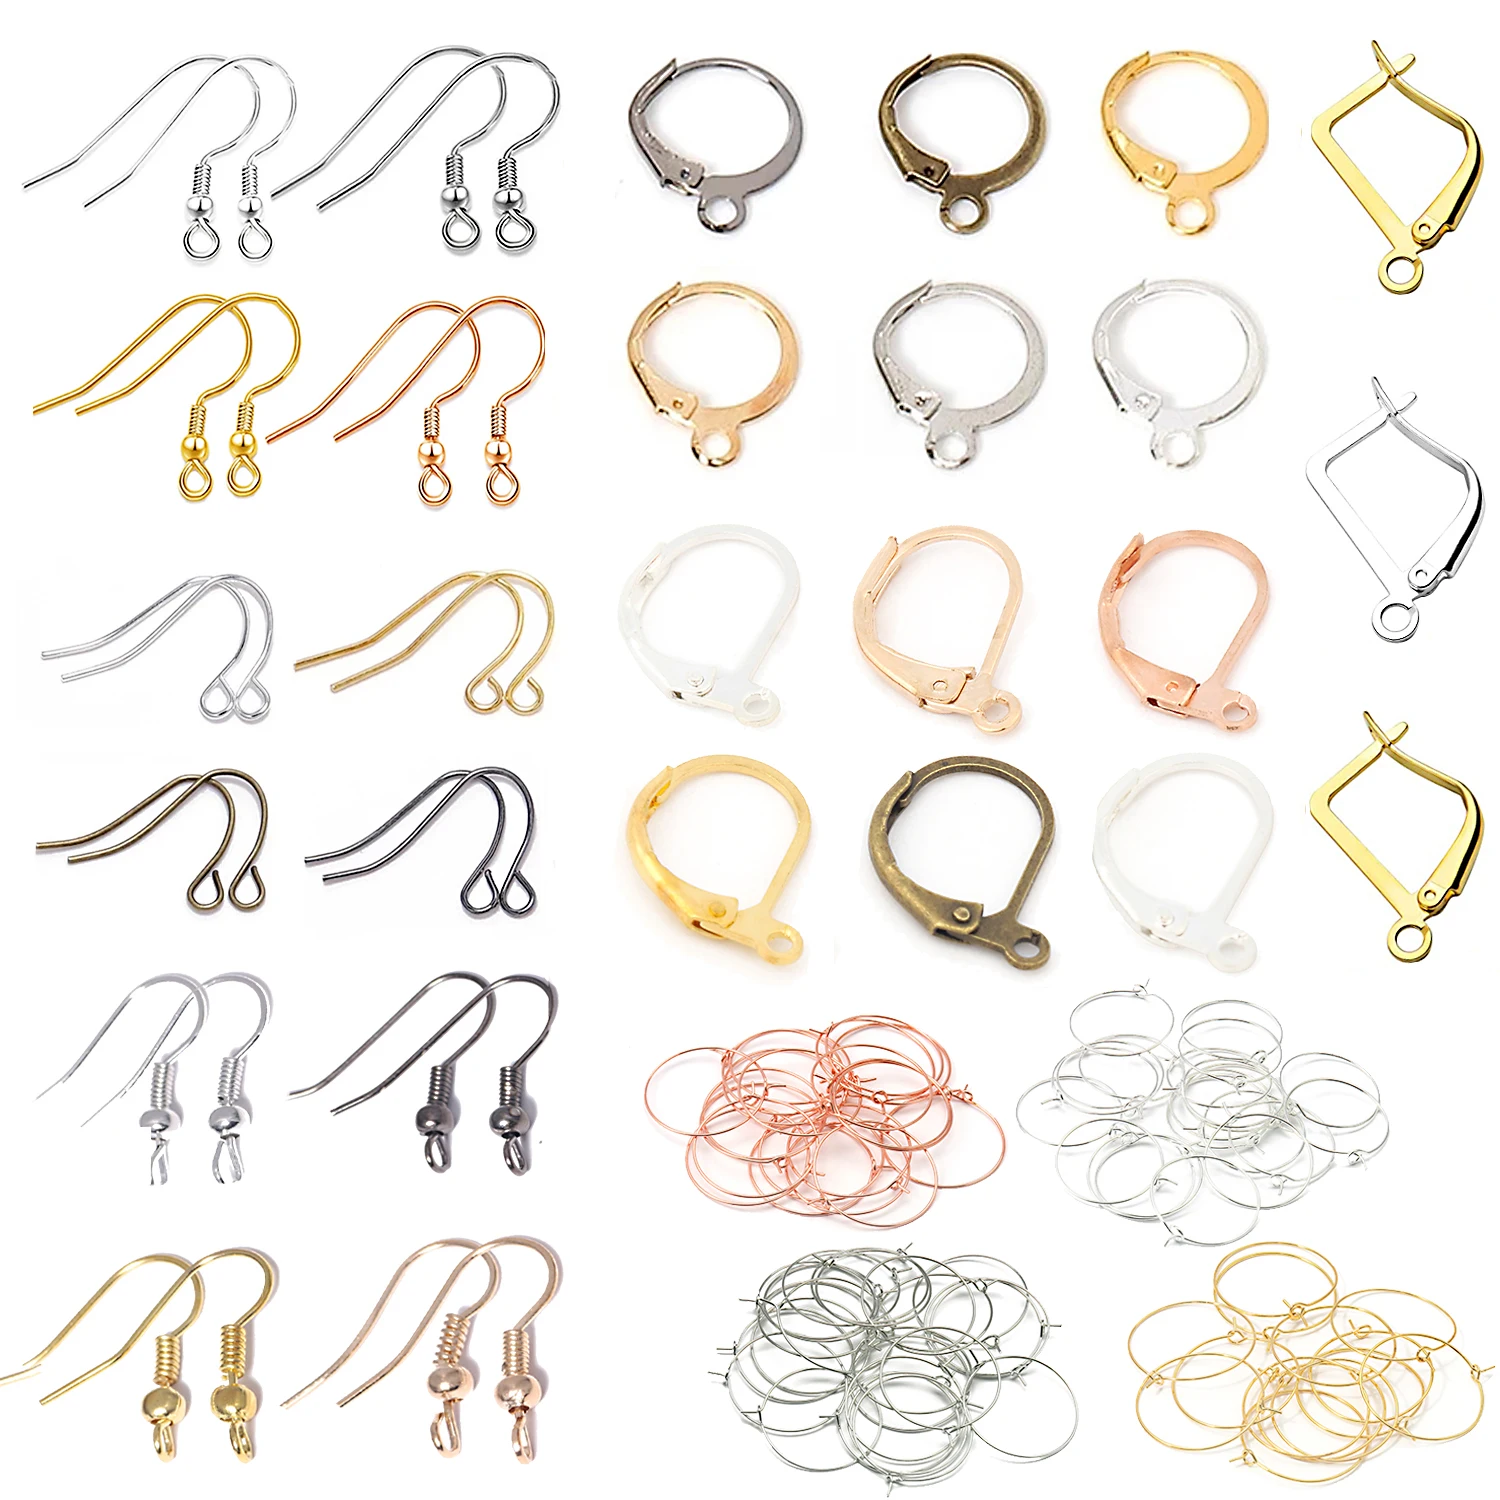 Know the Different Types of Earring Clasps